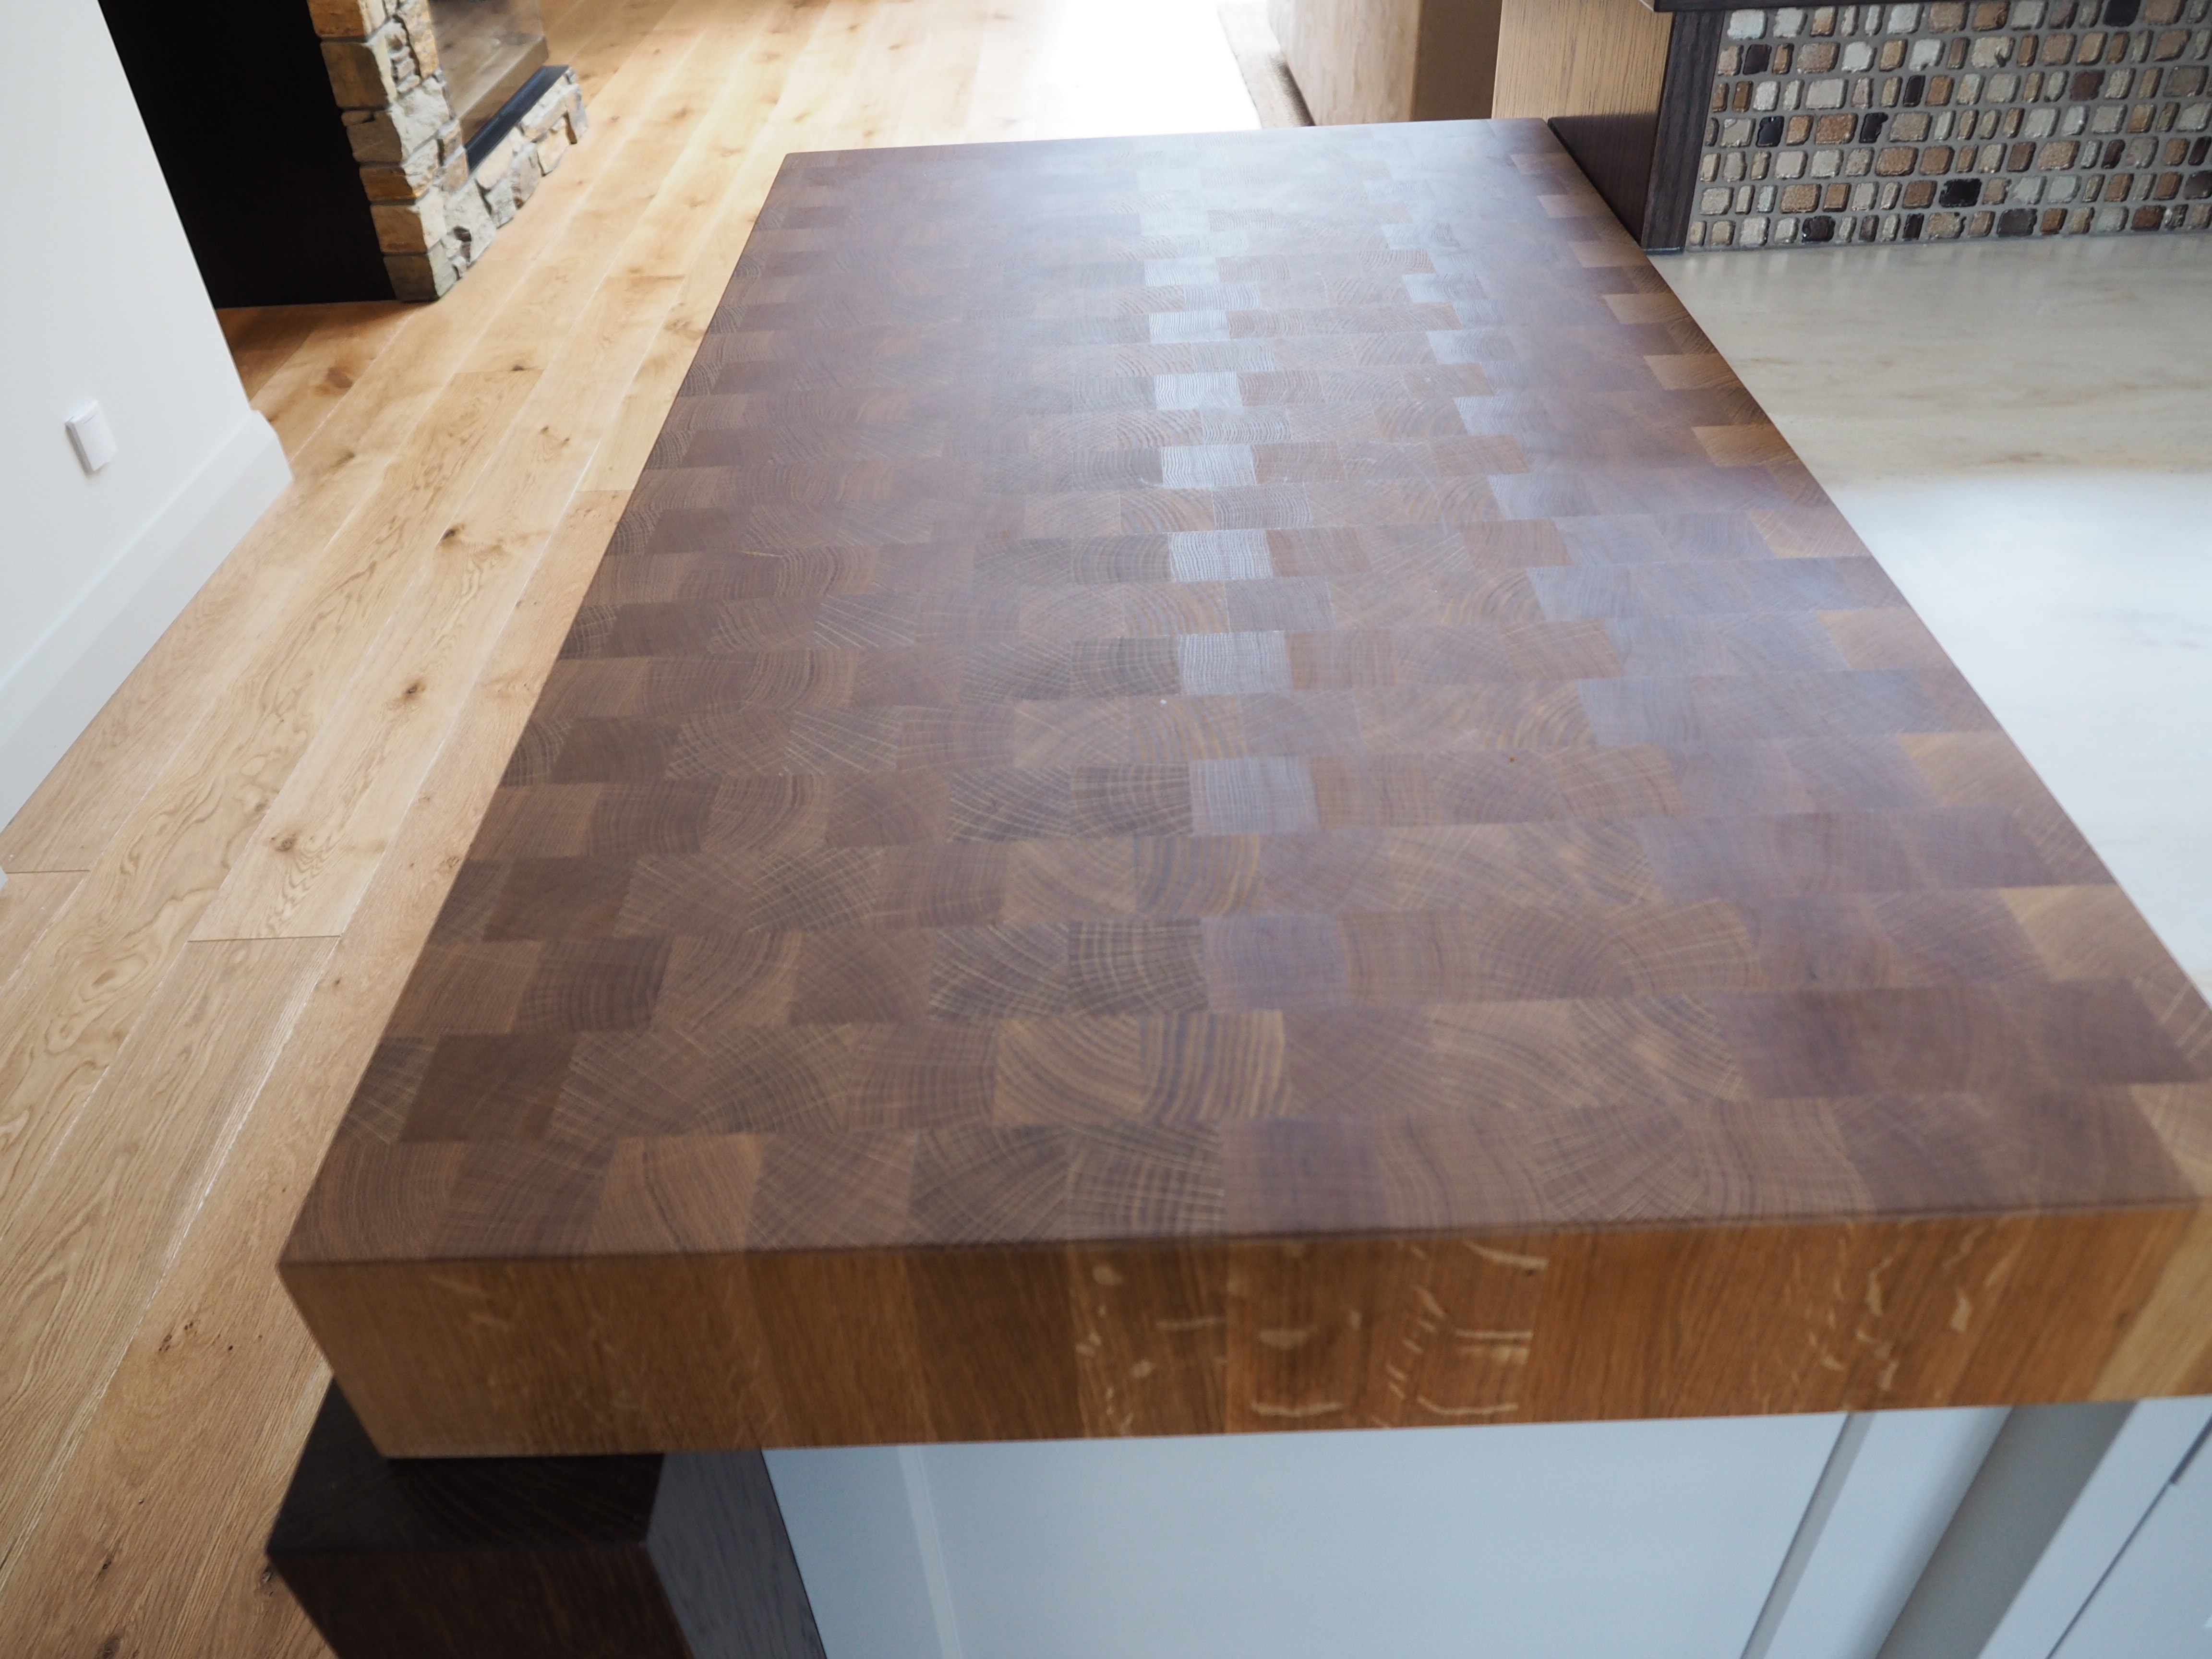 Handmade Designer Butchers Block Kitchen design cabinetry Tauranga BOP Kitchens & Cabinetmaking is a locally owned and operated company based in Tauranga Kitchen design & installation experts Renovations Consultancy and design